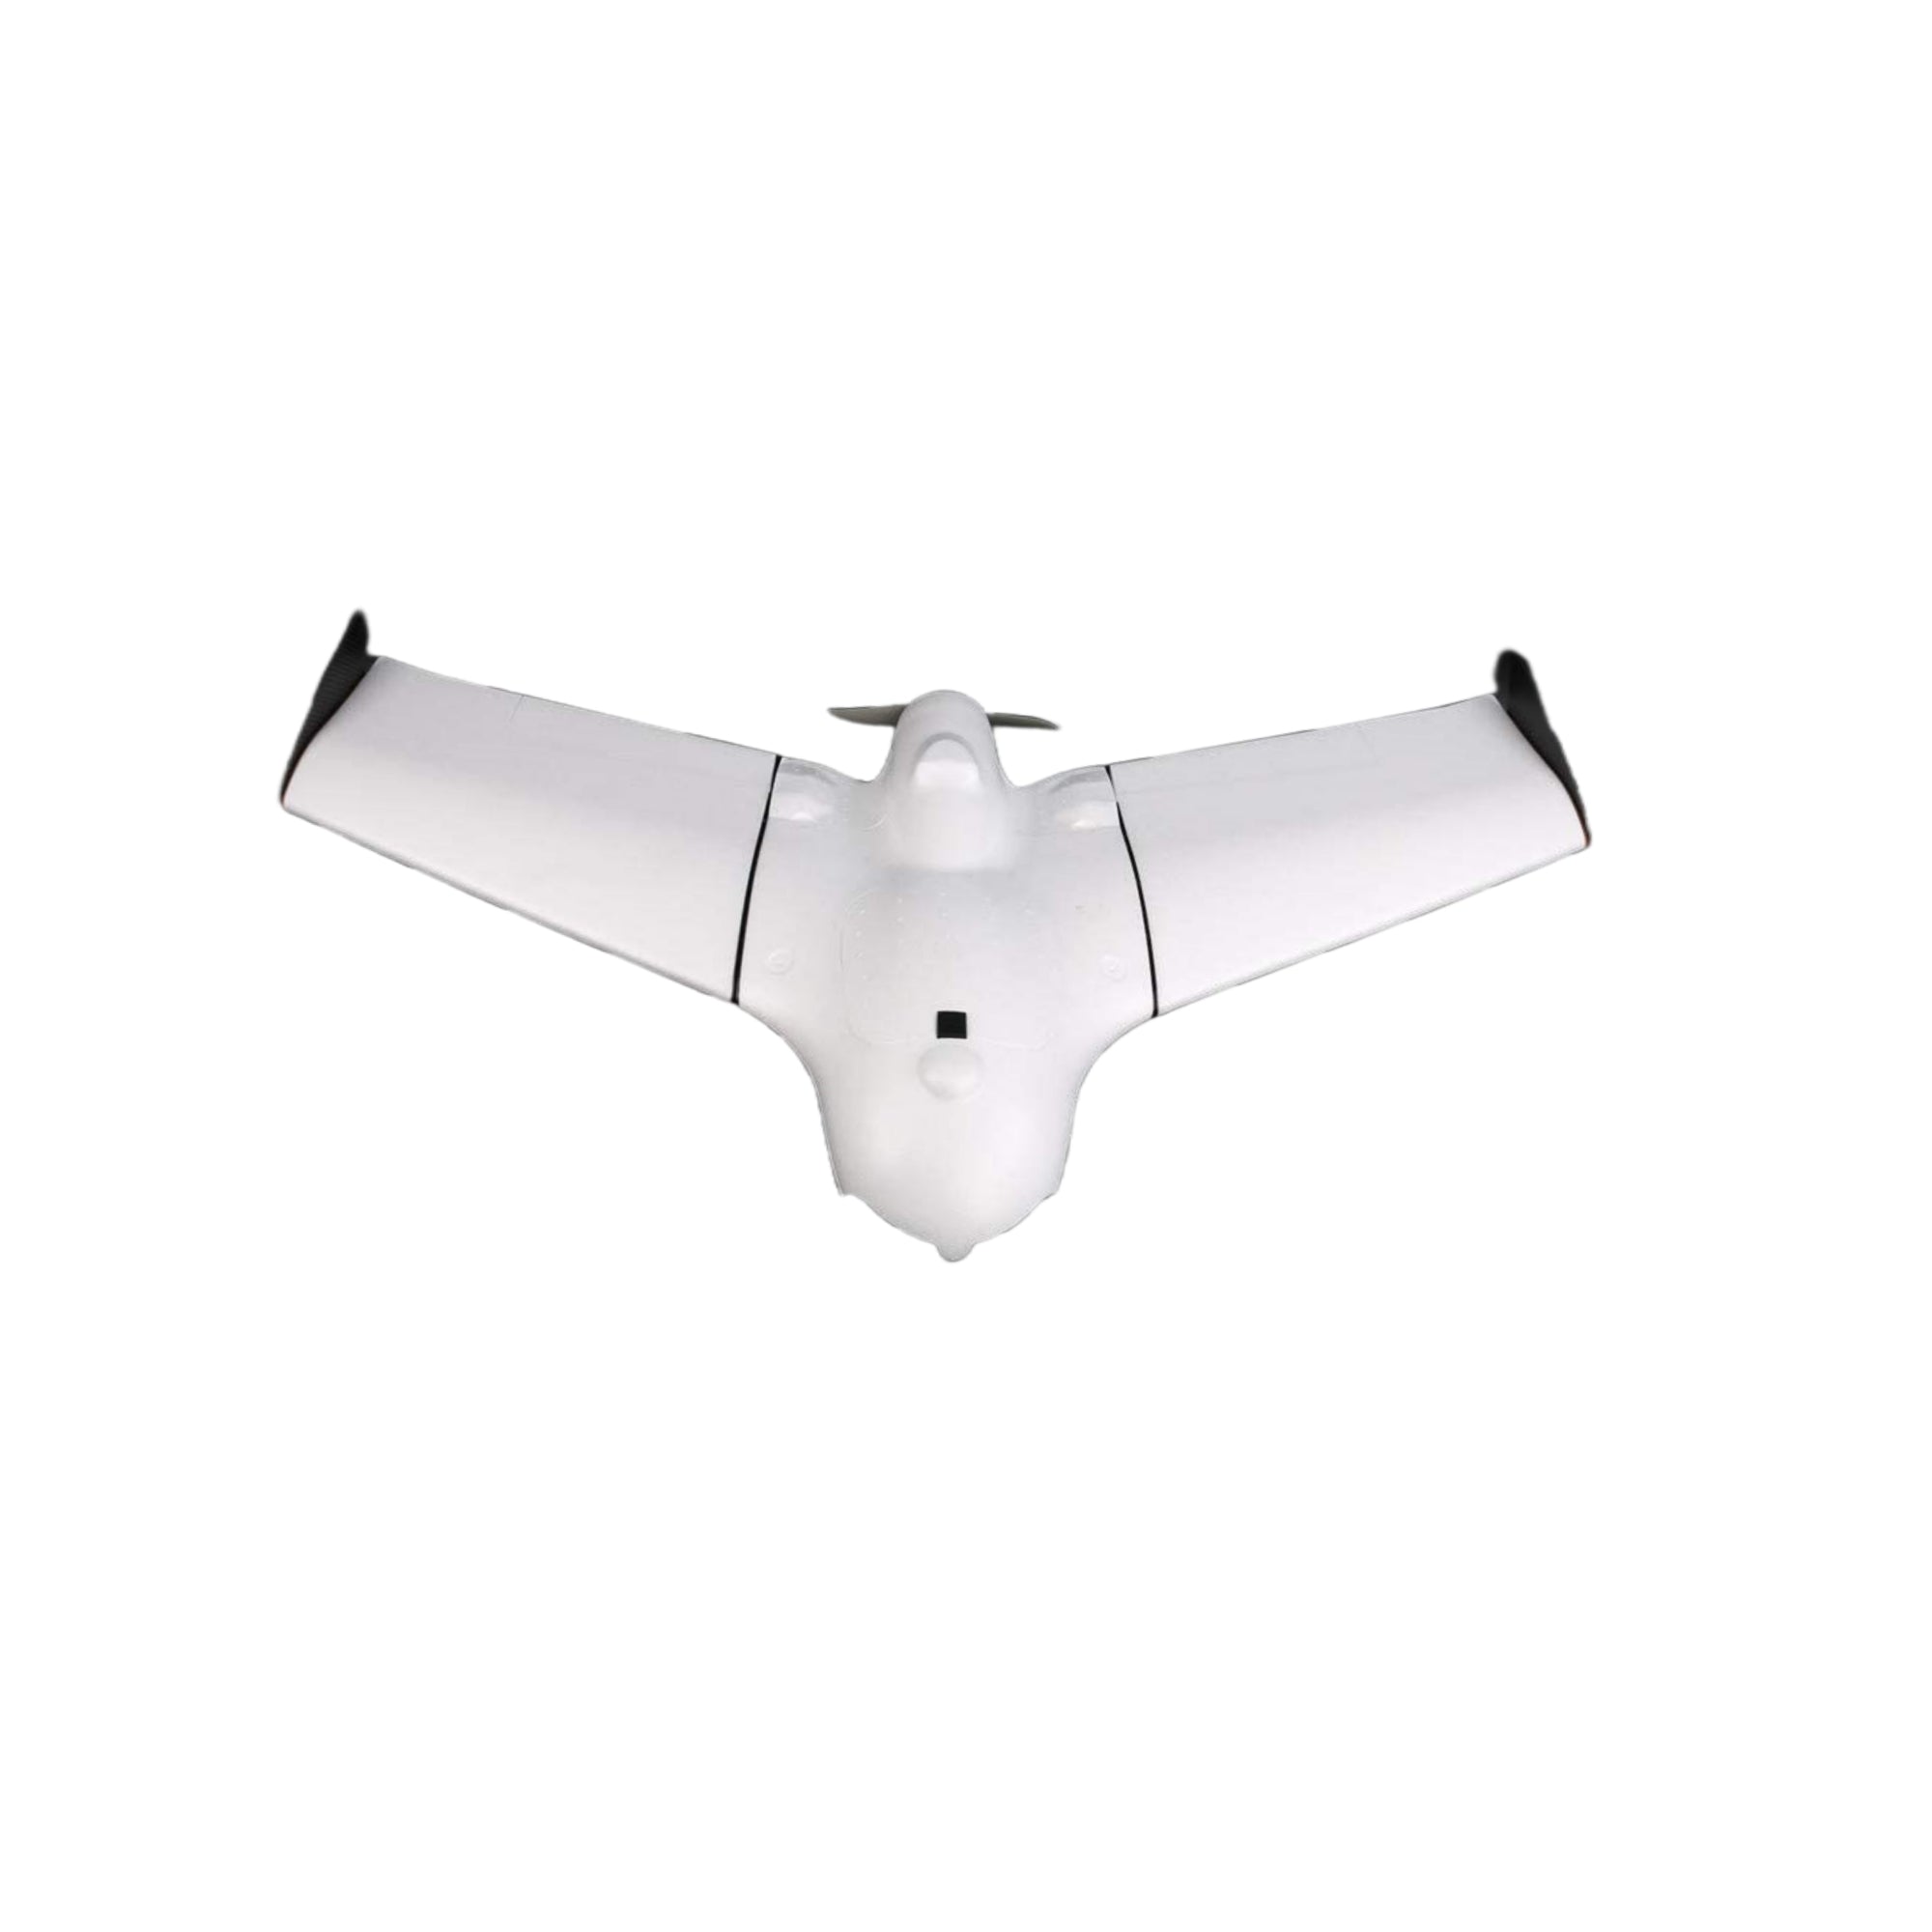 UnmannedRC Skywalker X5 PRO Fully Autonomous Aerial Mapping Drone - Unmanned RC